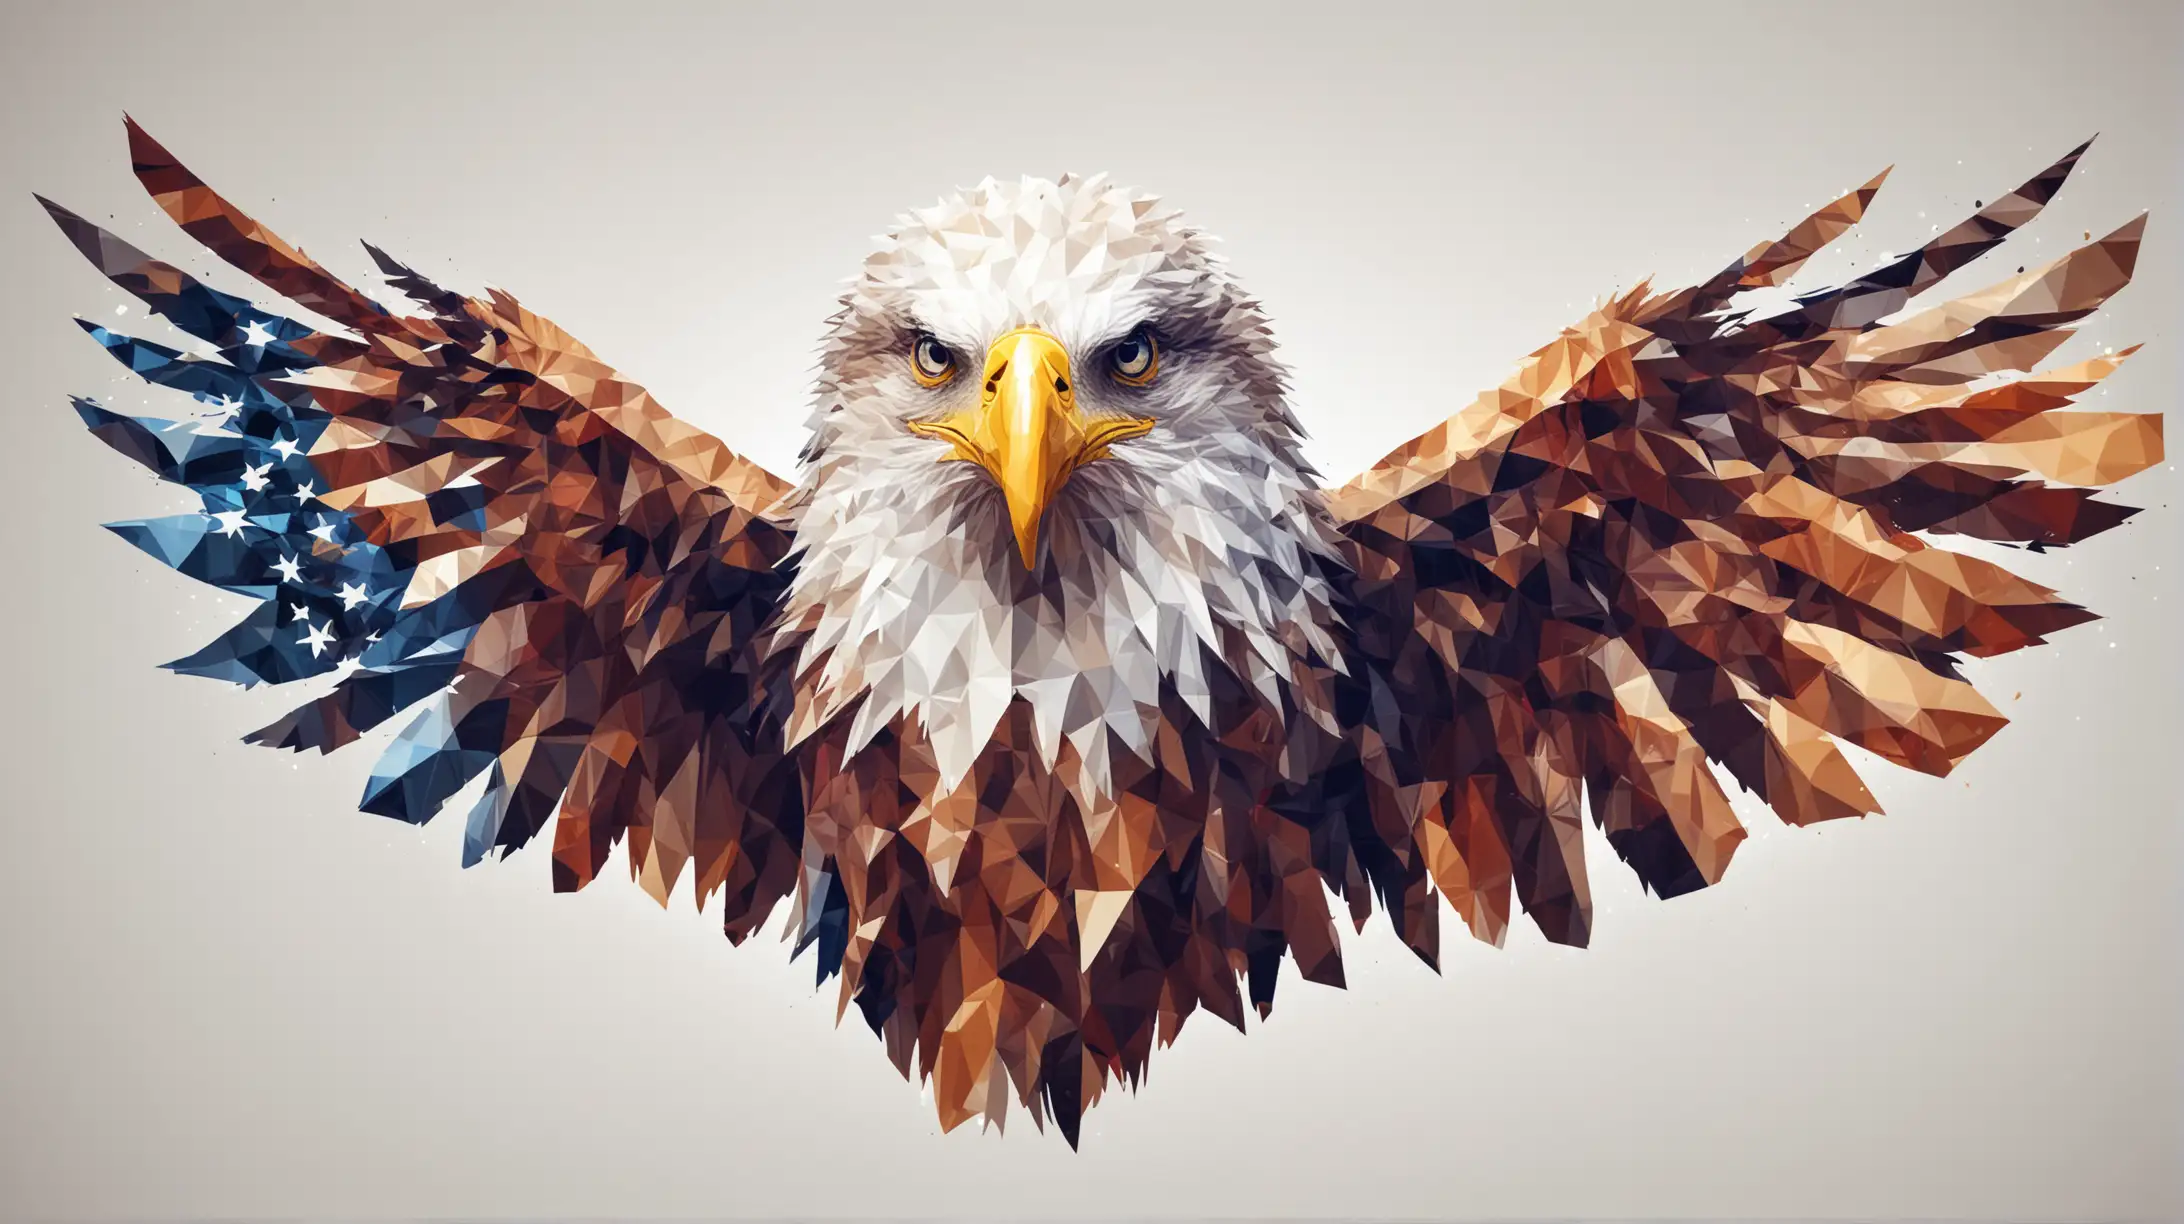 Abstract Polygon American Eagle on White Background